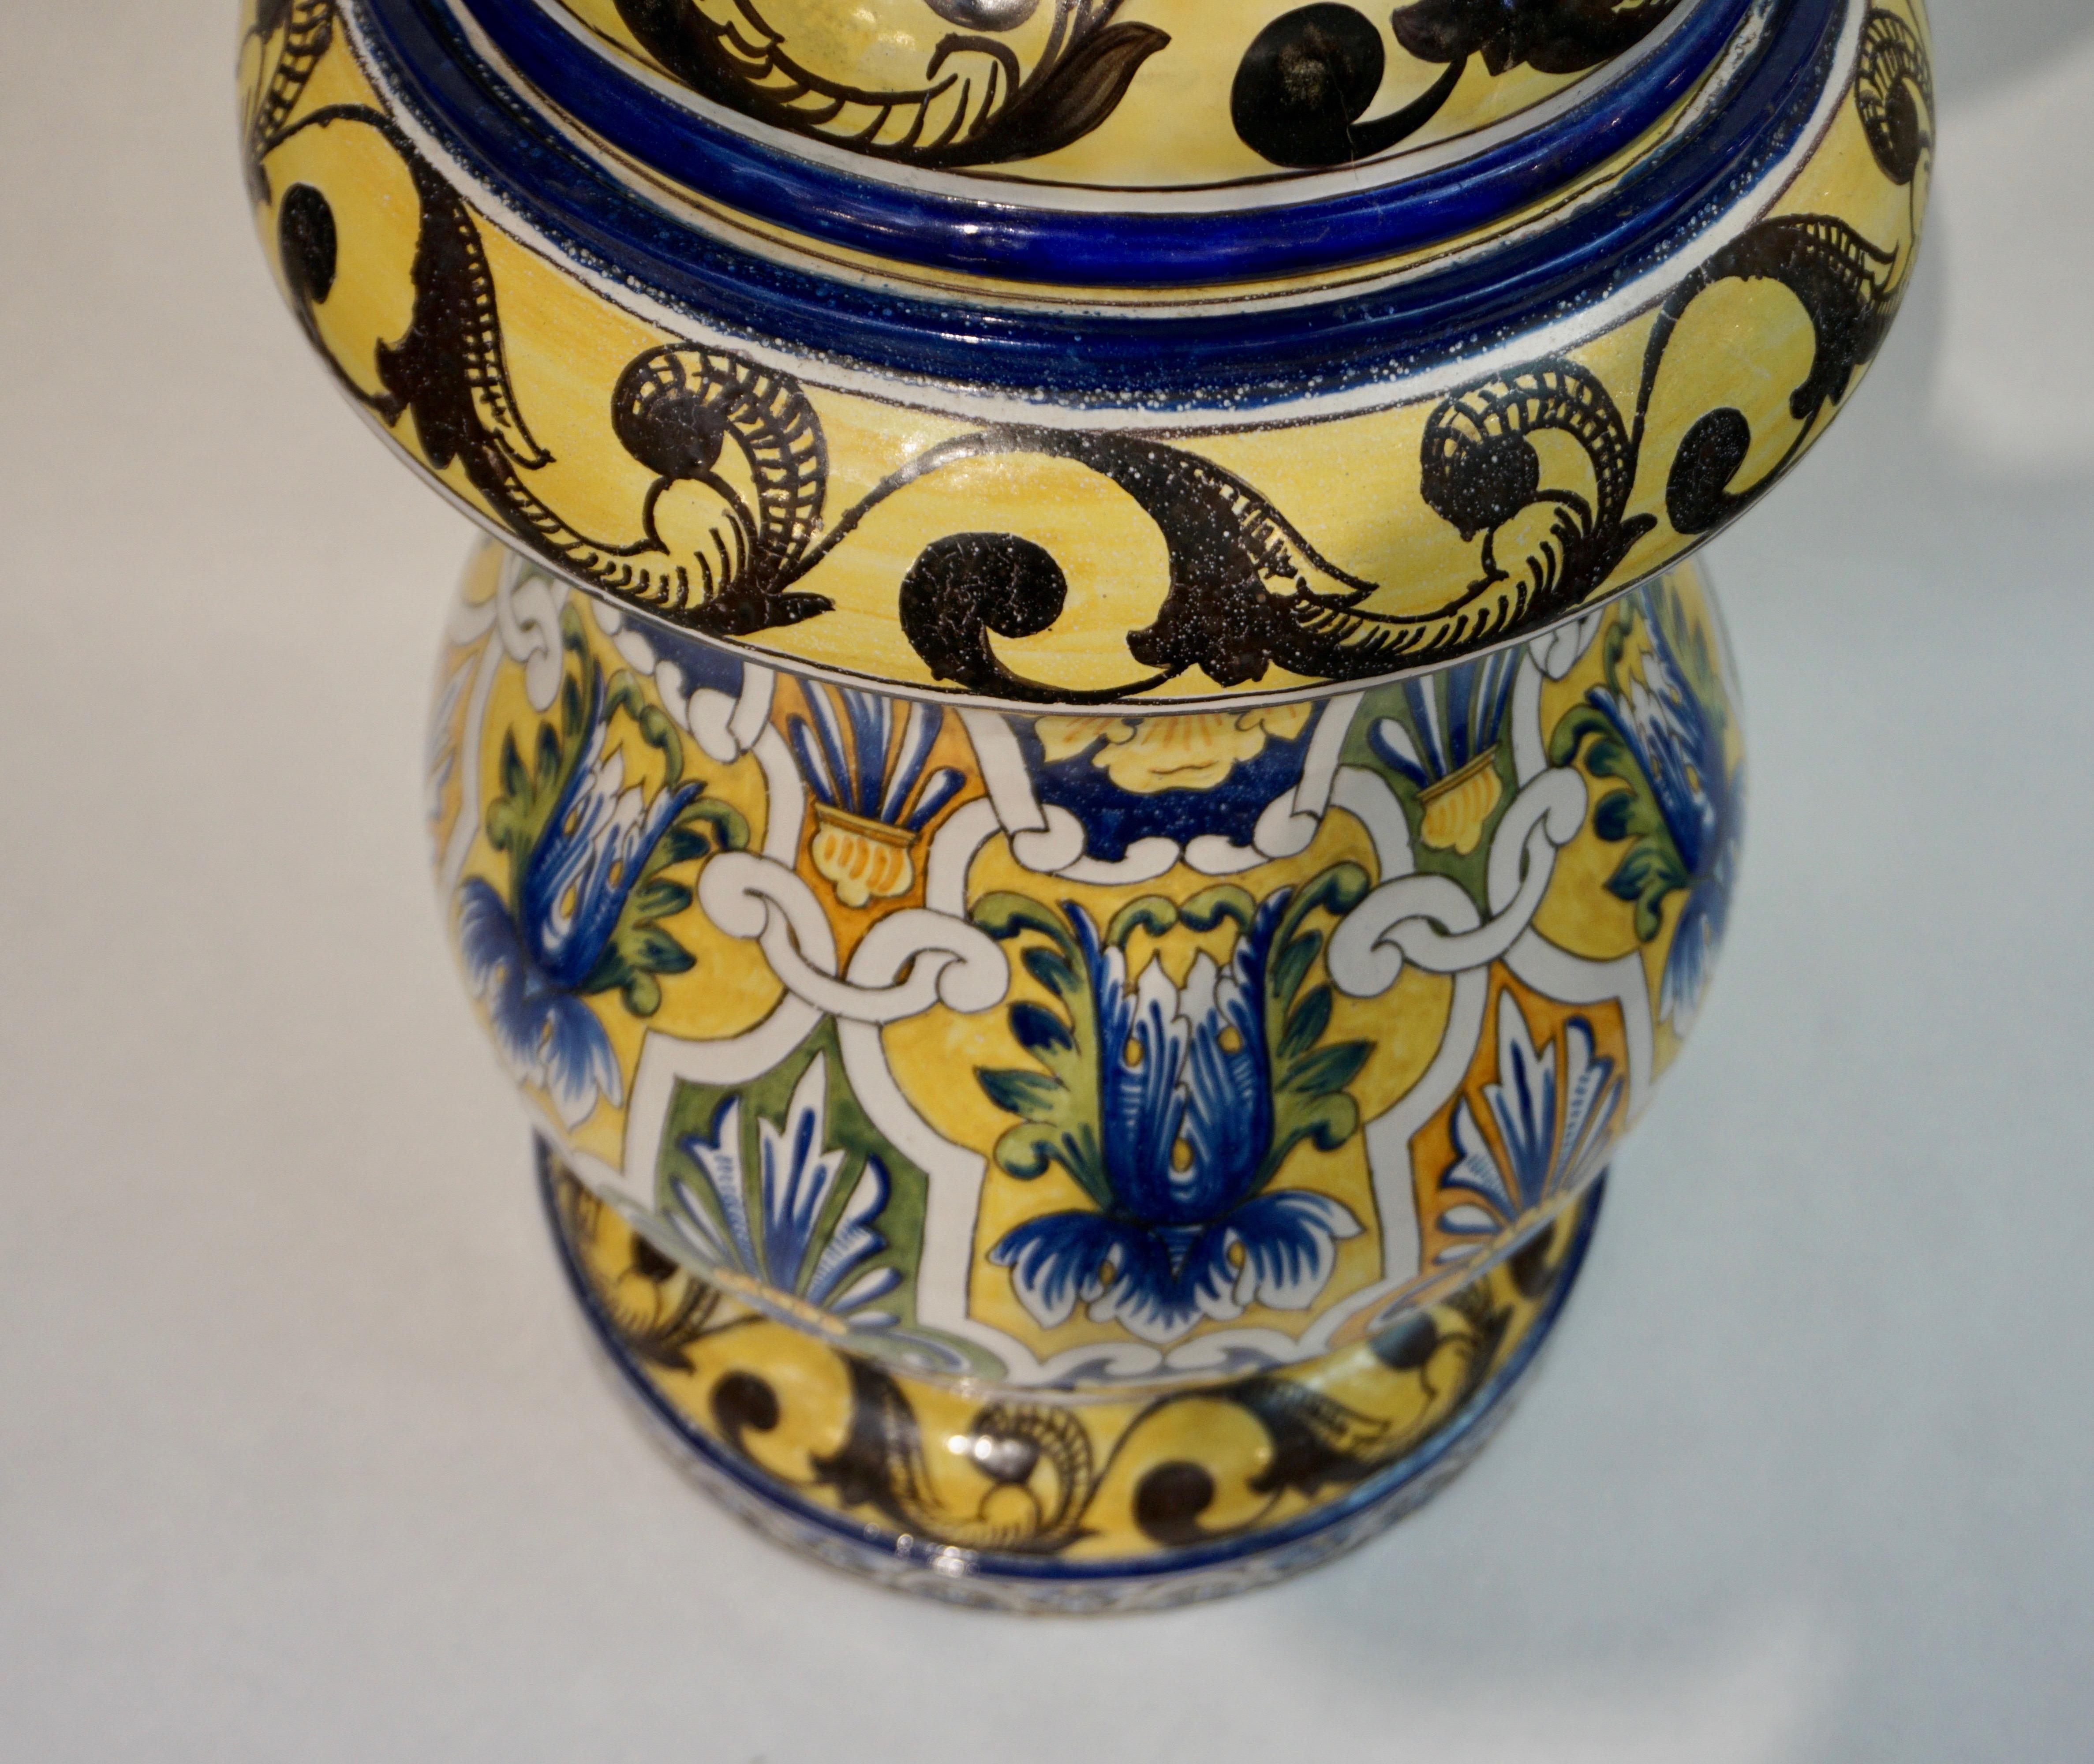 Enamel Montagnon 1880s French Monumental Blue Yellow Green Majolica Jardinière on Stand